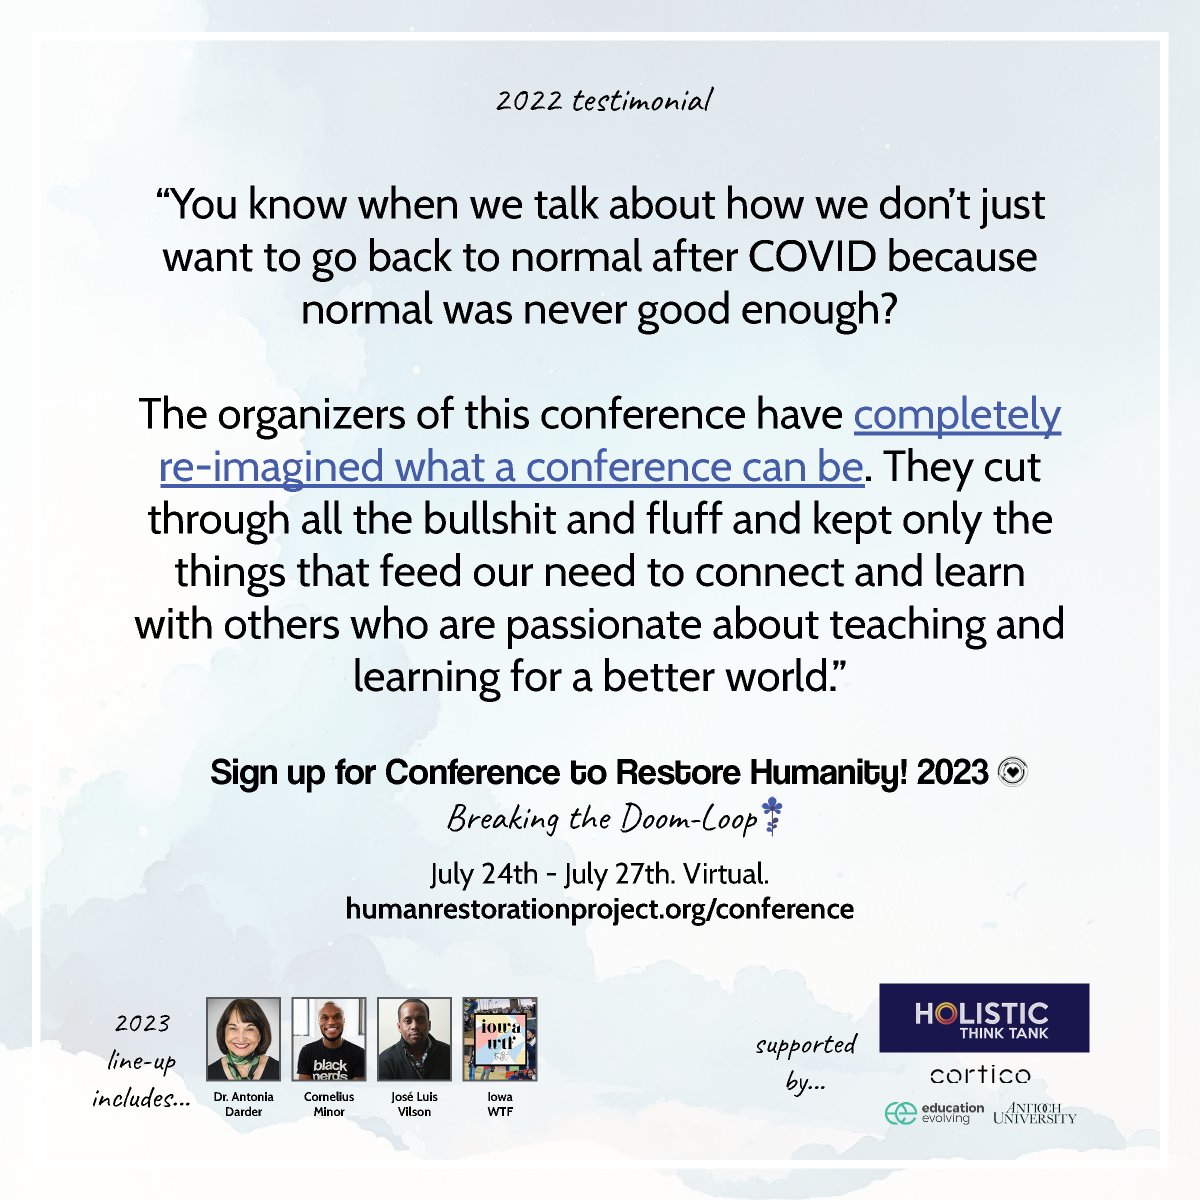 What did last year's participants have to say about Conference to #RestoreHumanity? 'The organizers of this conference have completely re-imagined what a conference can be.' humanrestorationproject.org/conference #mathchat #educolor #edchat #K12 #tg2chat #pblchat A thread 🧵: